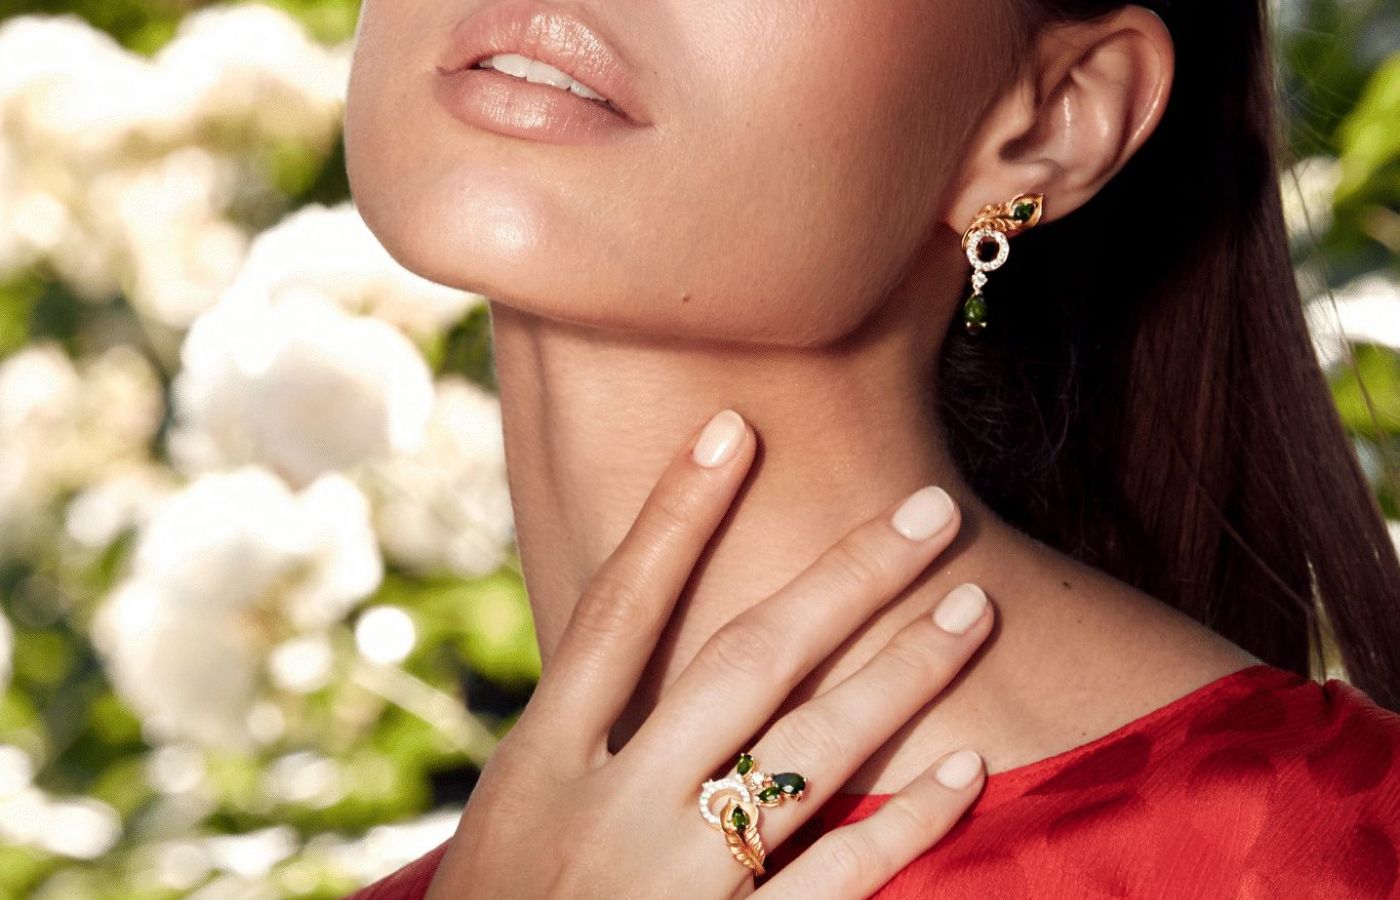 A model wears the Carrera y Carrera Mistral earrings and ring from the Origen collection, set with diopsites and diamonds in 18k gold